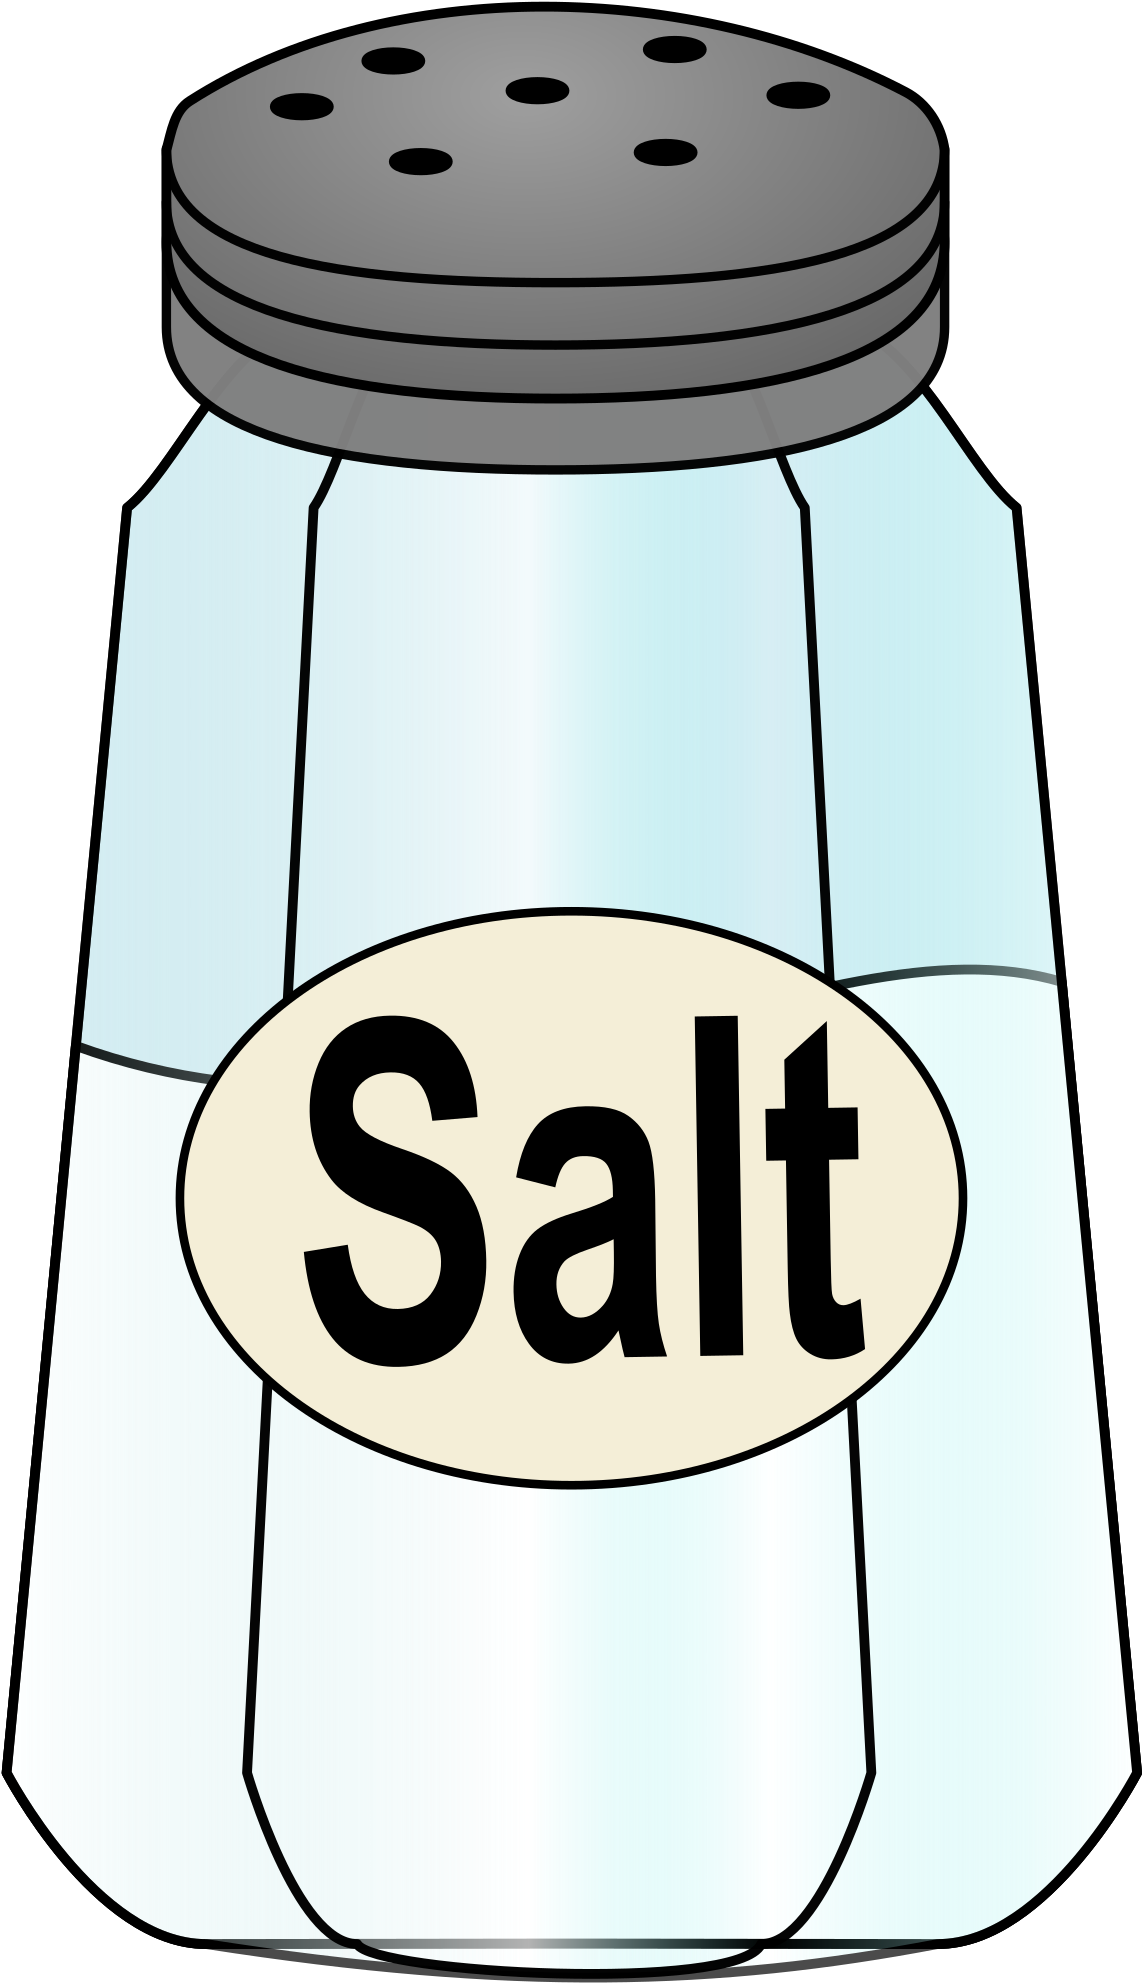 A Salt Shaker With A Label